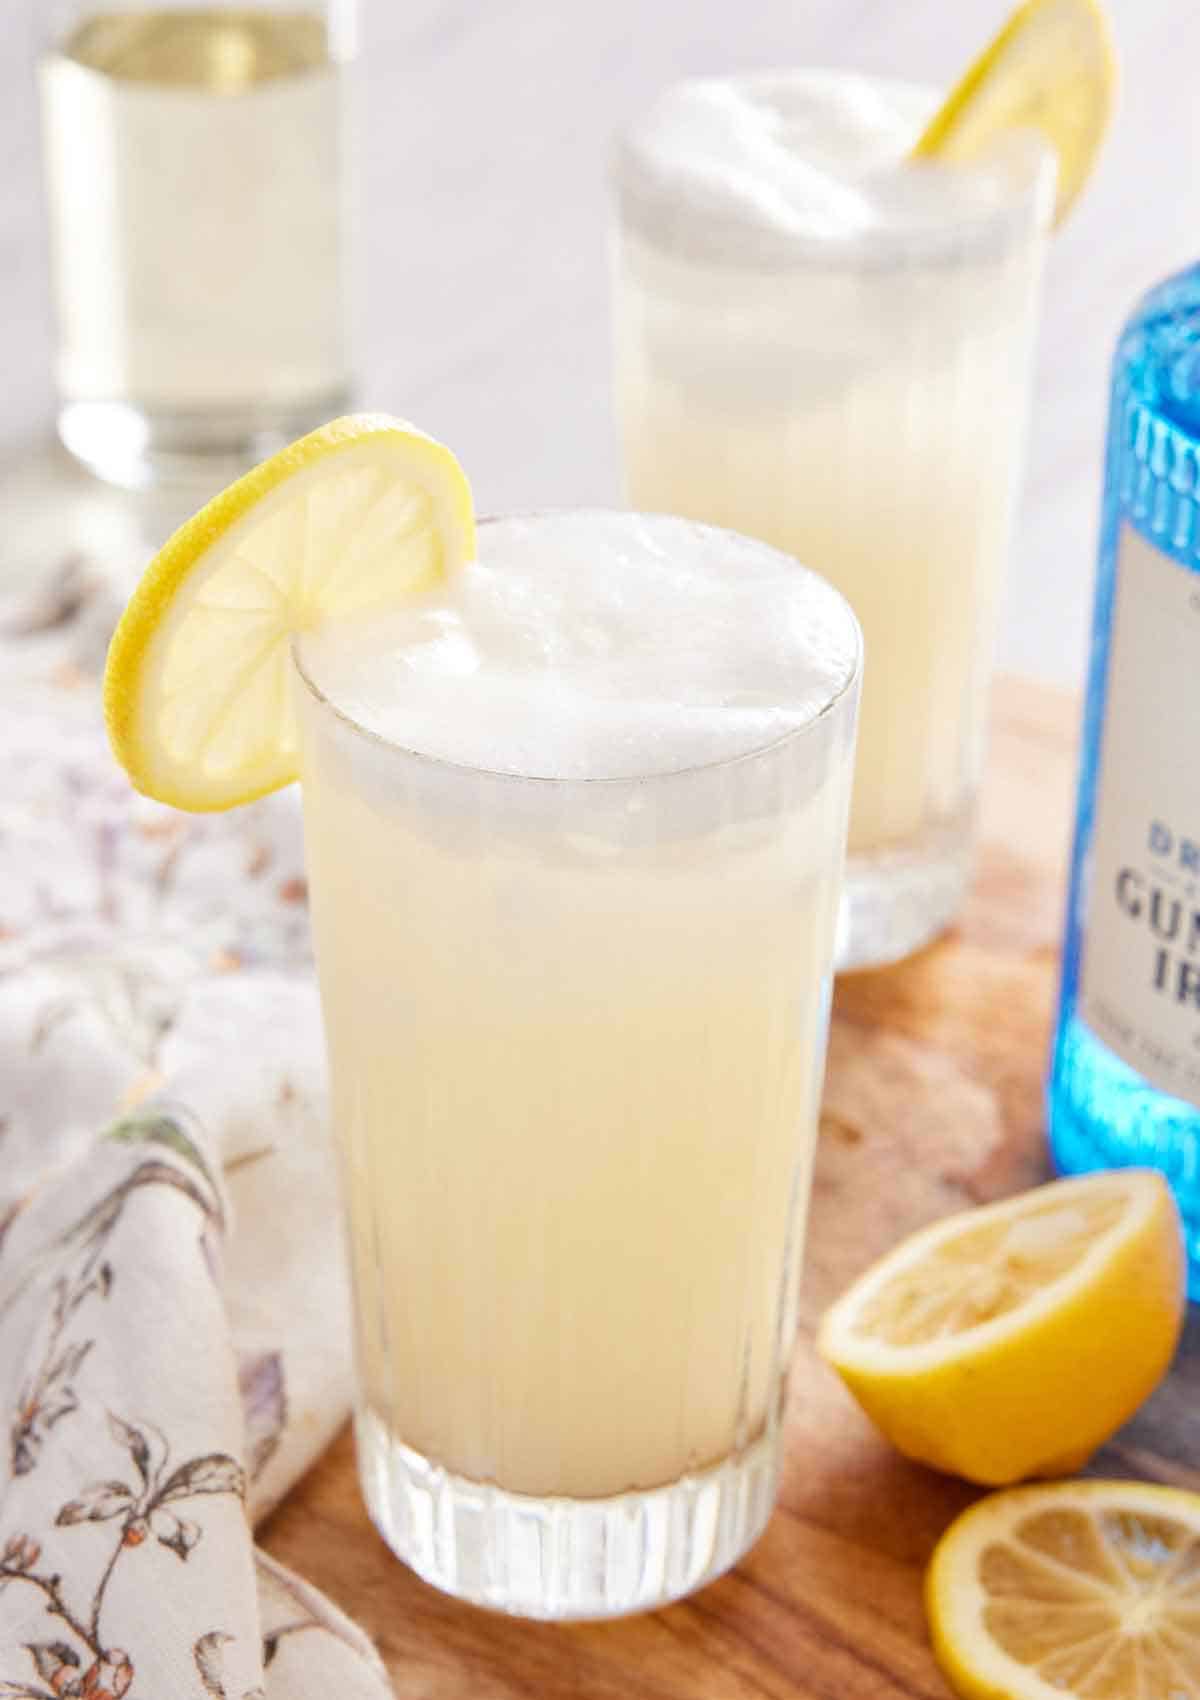 A tall glass of Gin Fizz with a lemon slice on the rim with another glass, a gin bottle, and cut lemons off to the side.